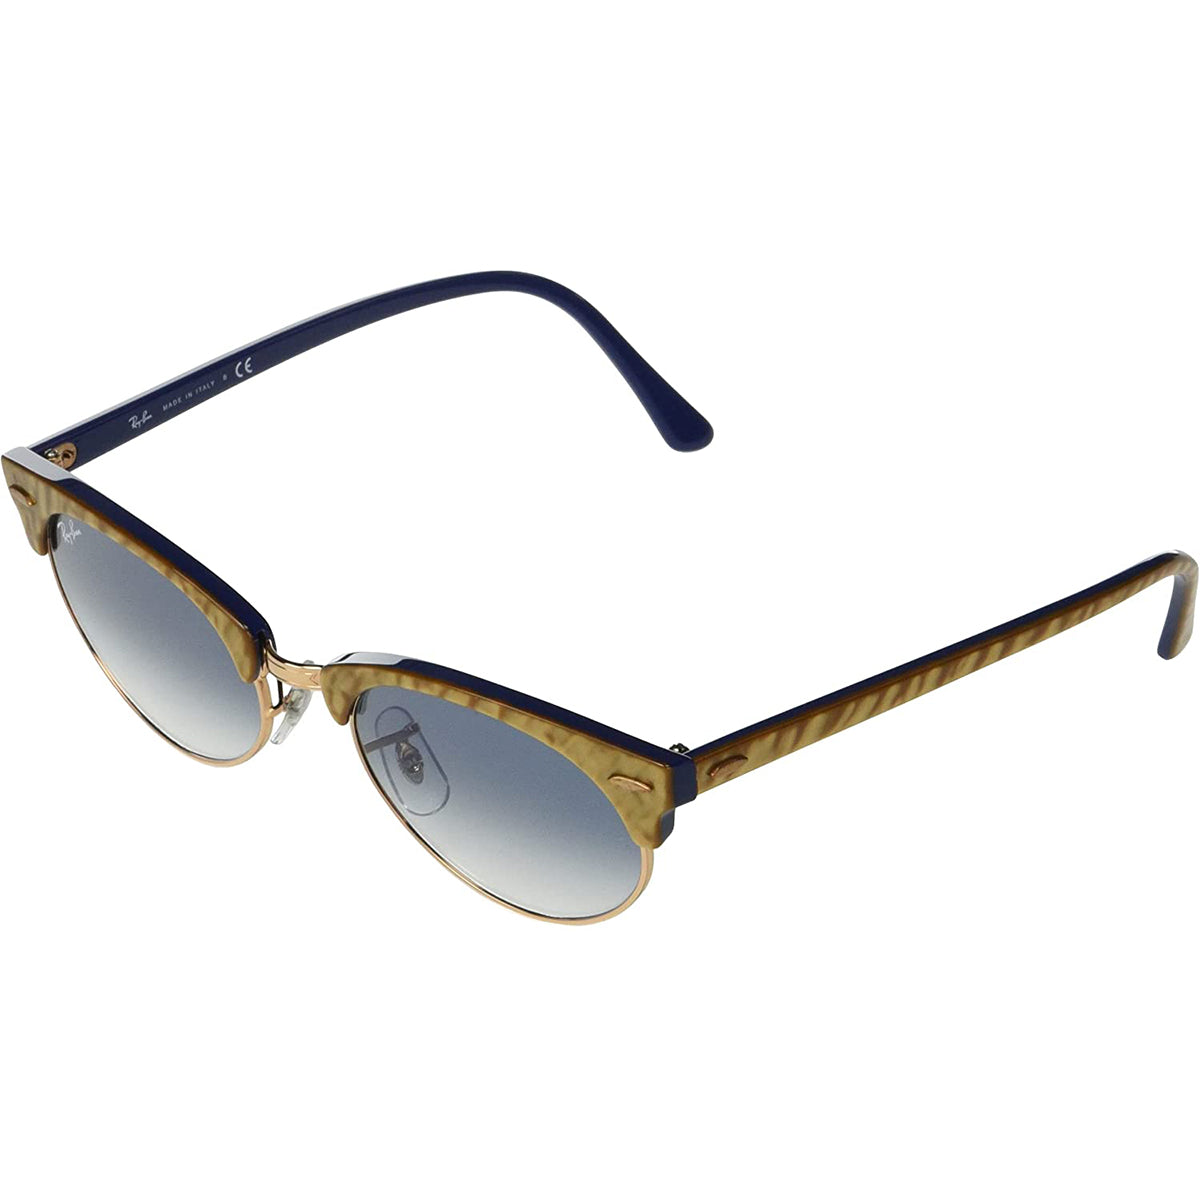 Ray-Ban Clubmaster Wrinkled Blue Sunglasses